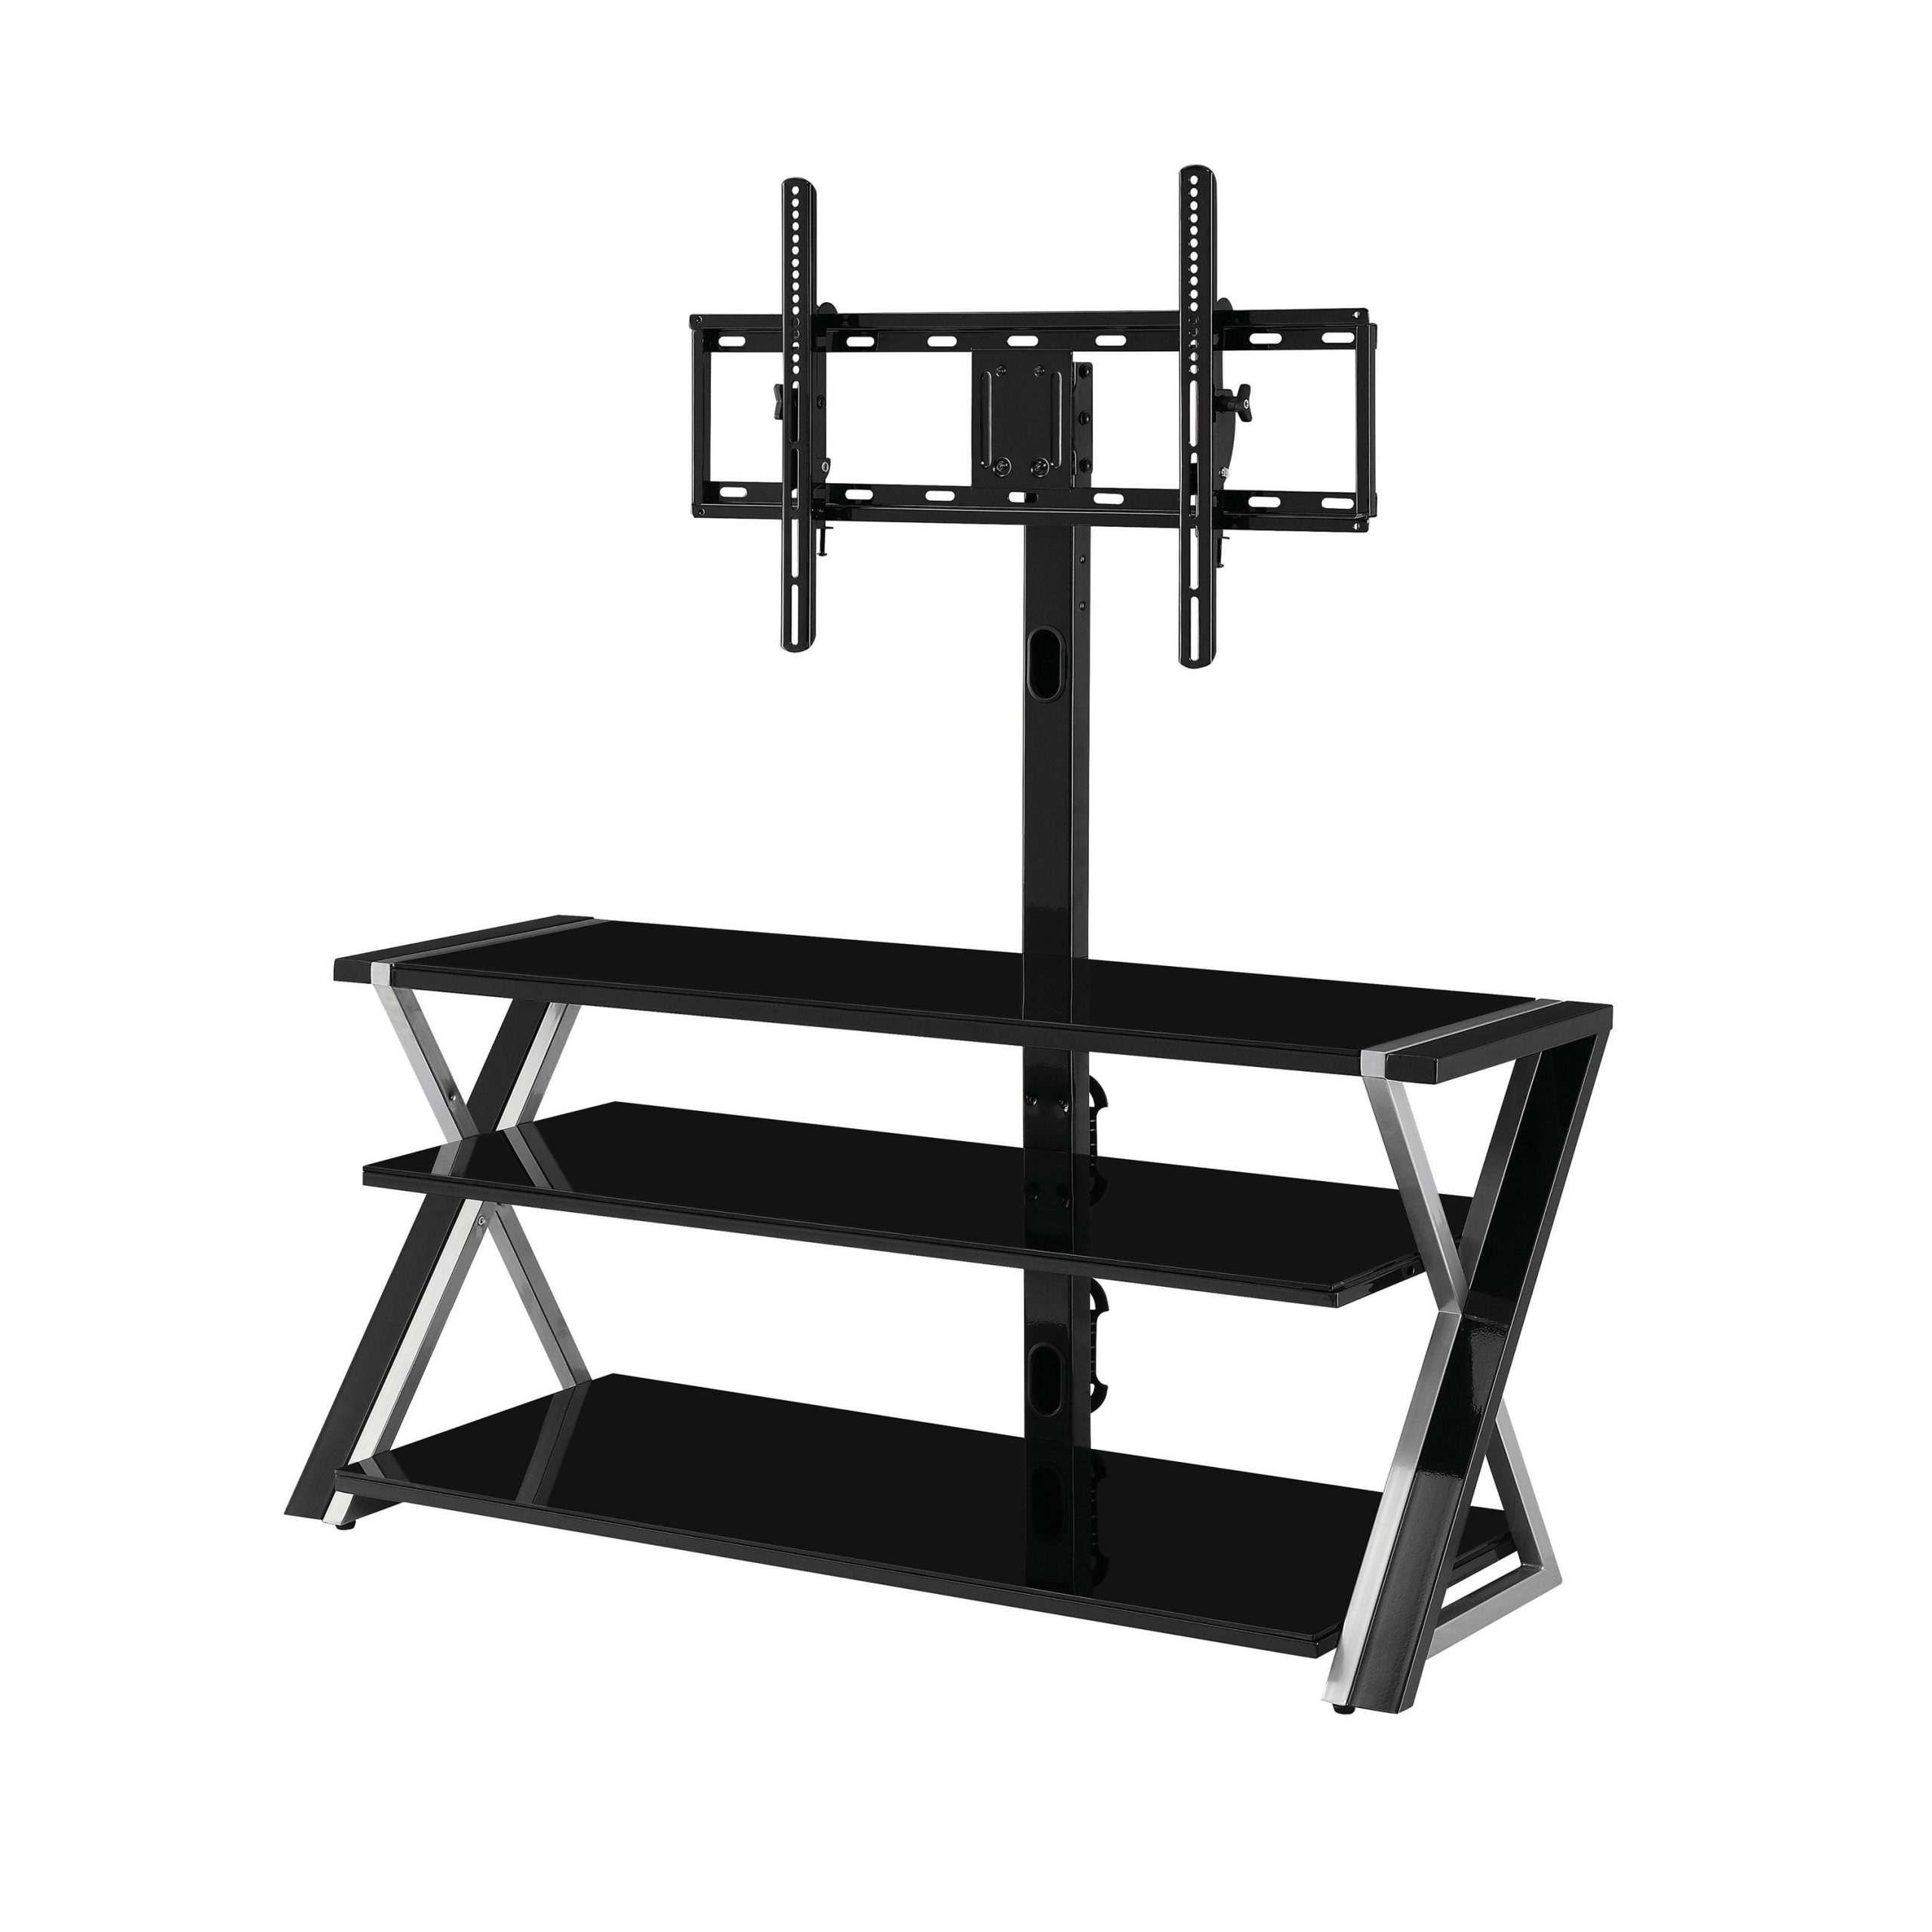 3-in-1 TV Stand for TVs up to 70' w/ 3 Display Options Flat Screens Black/Silver 